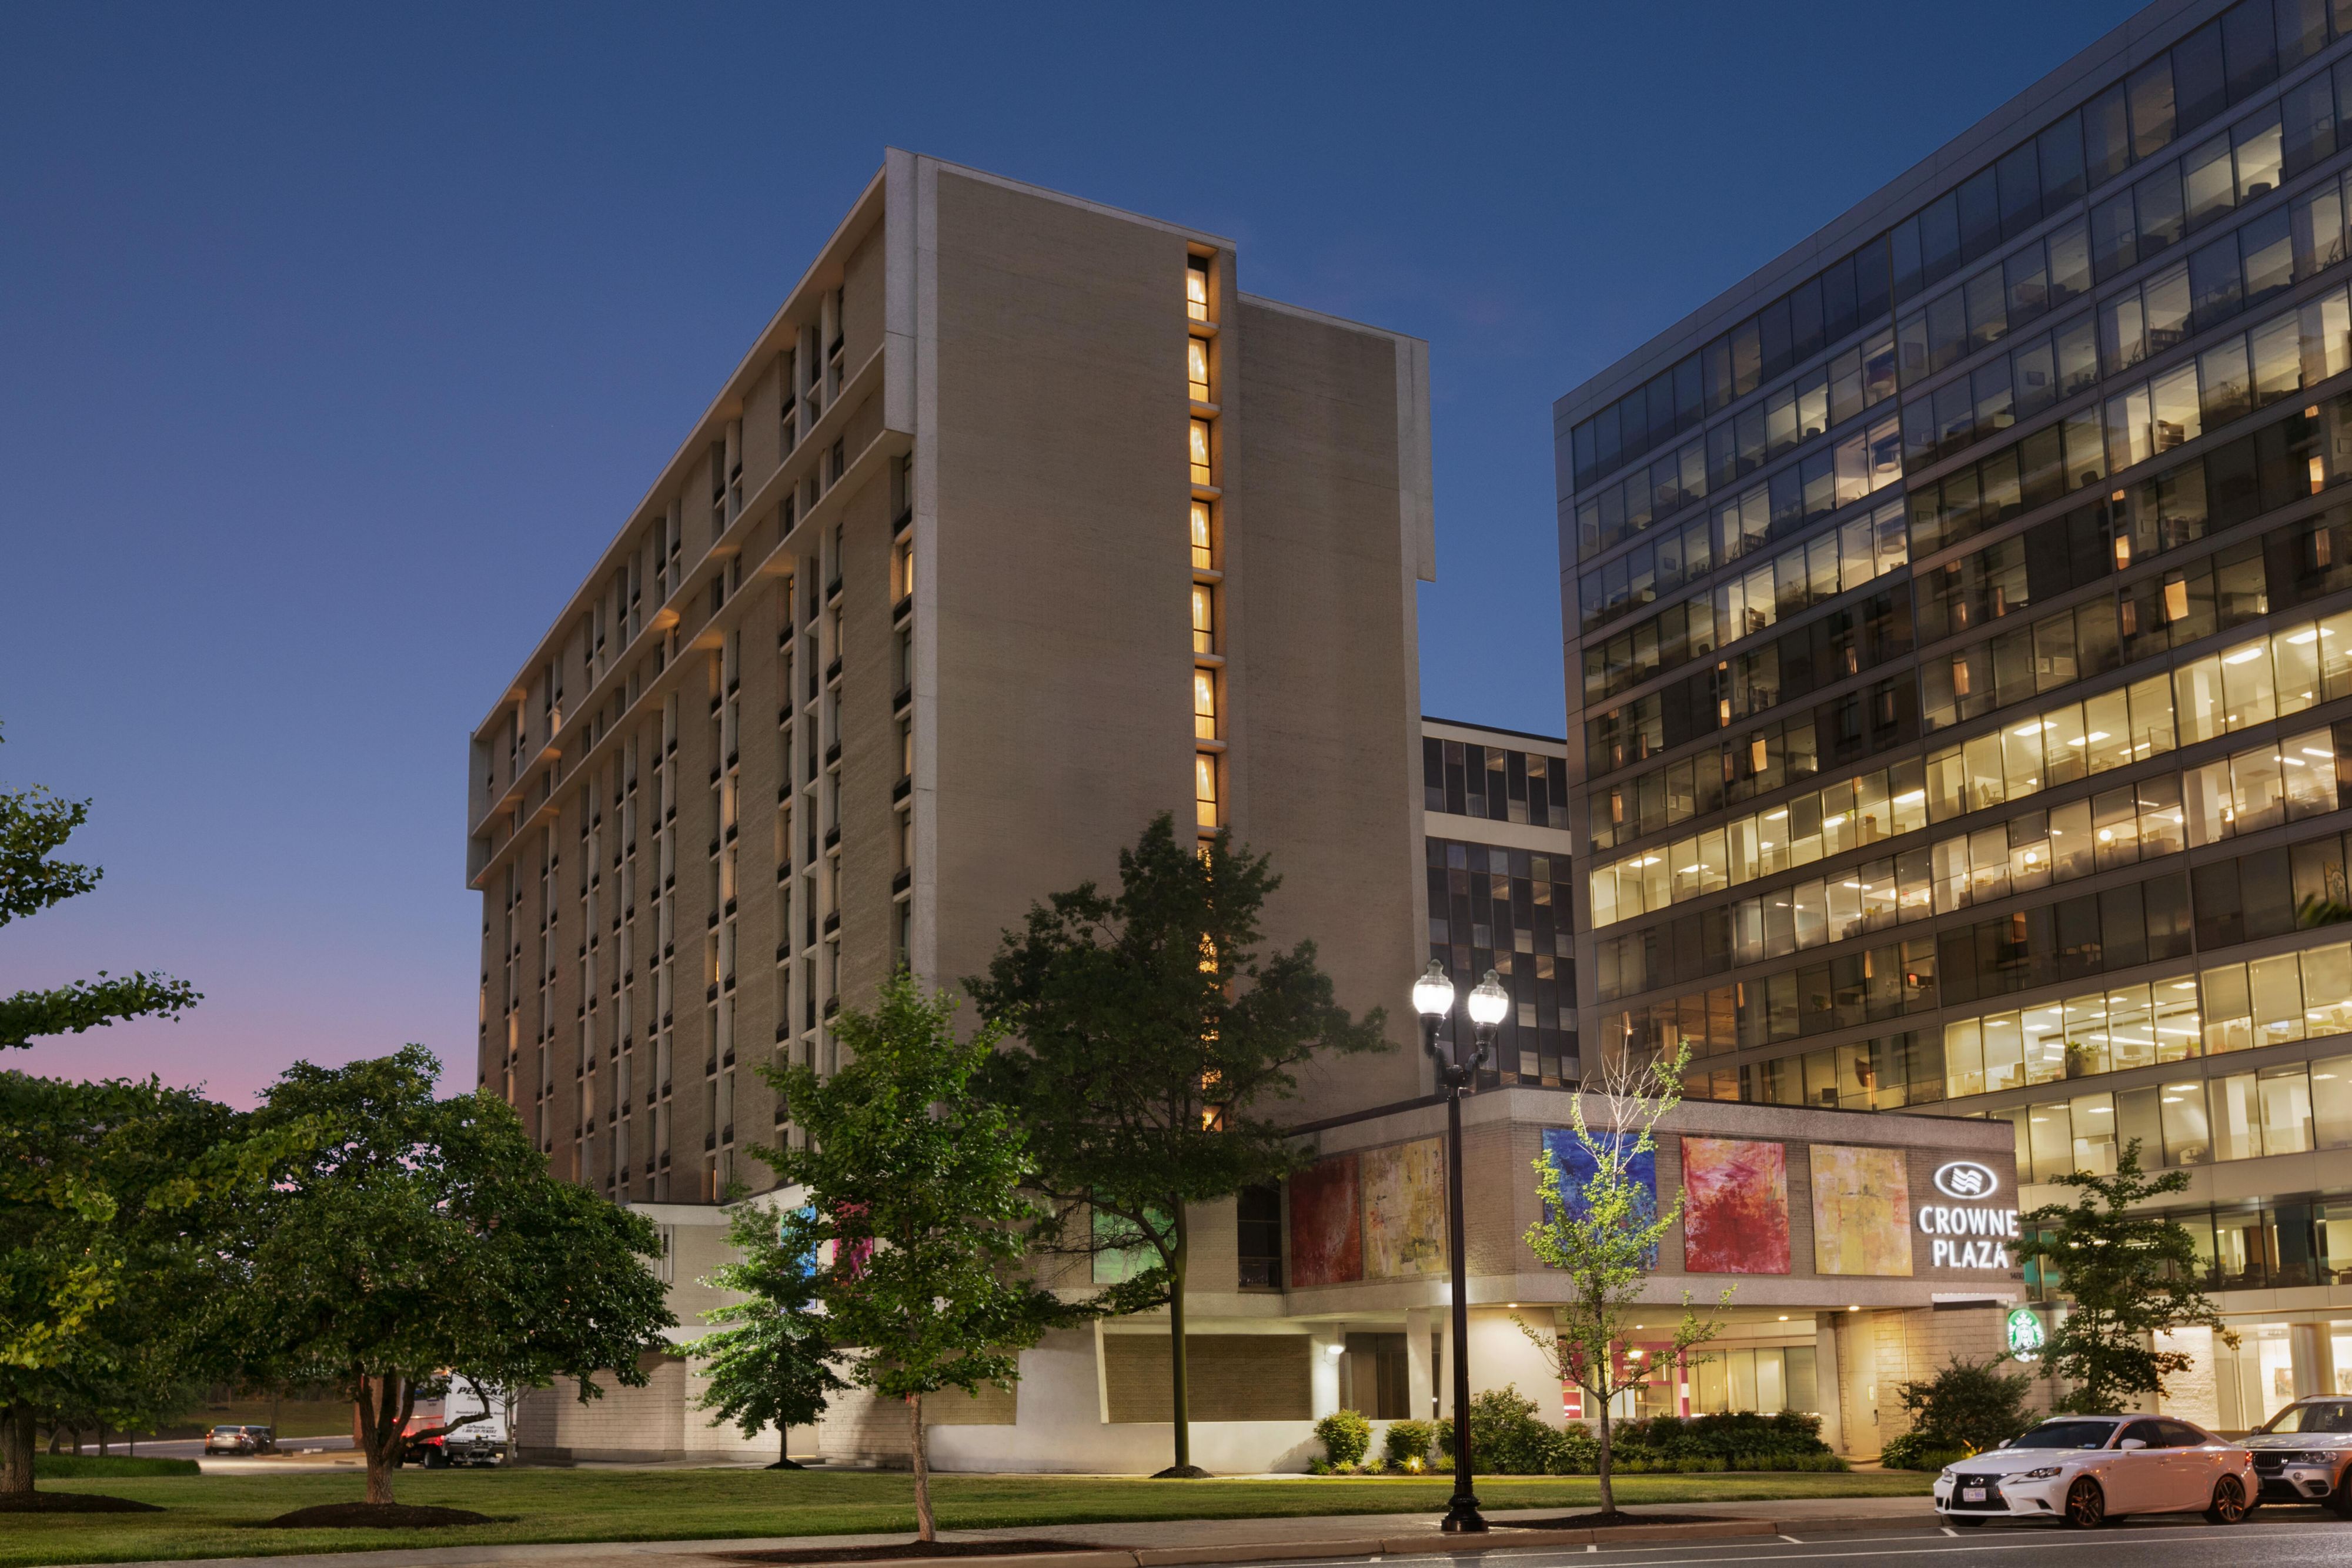 Our hotel is located in the heart of vibrant Crystal City.